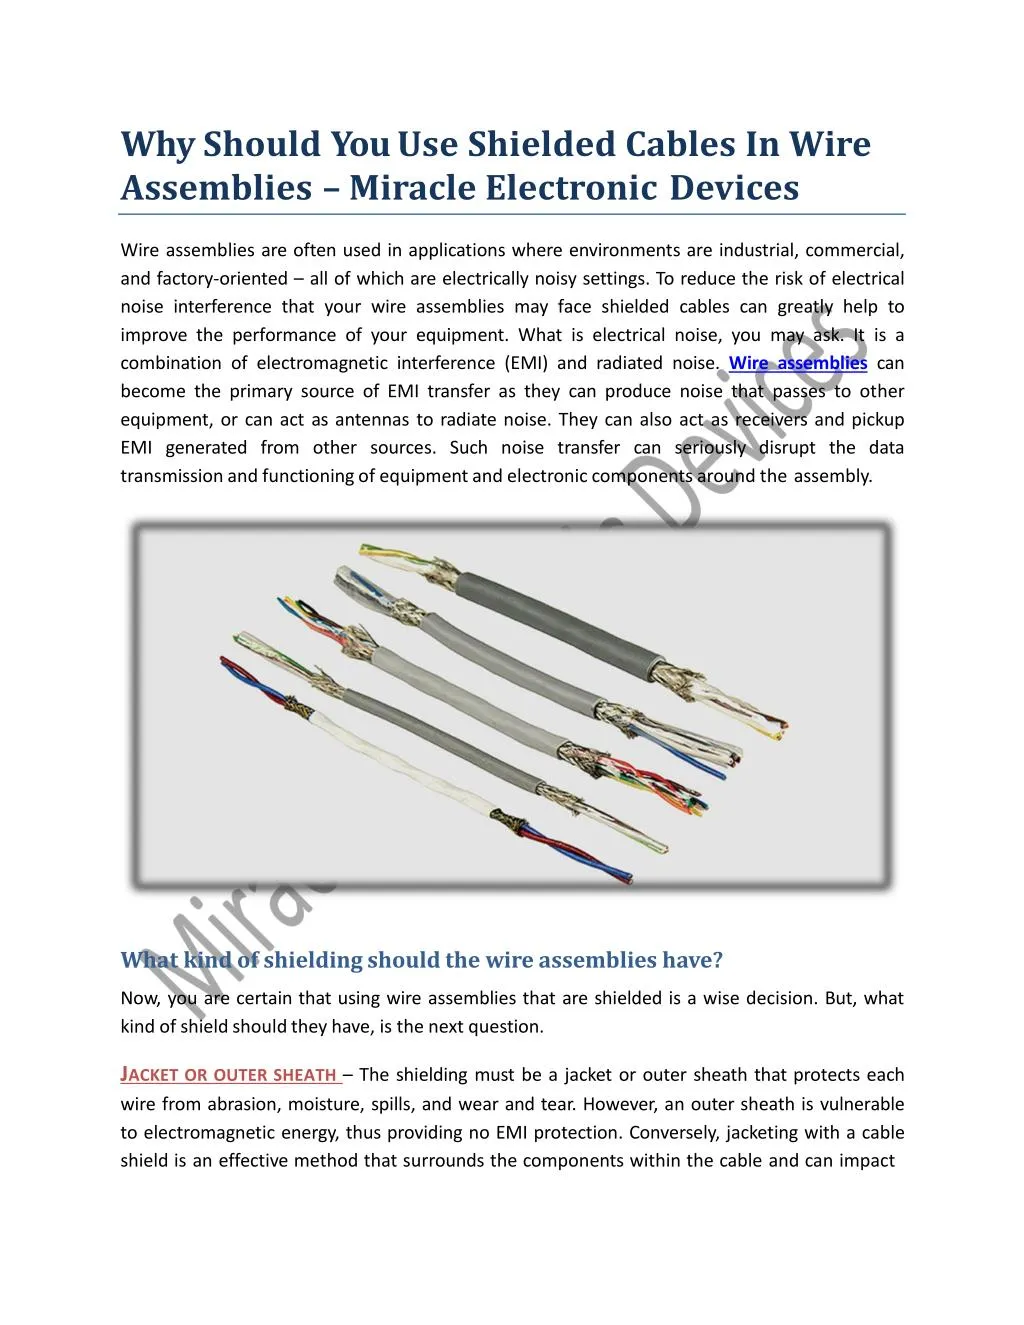 why should you use shielded cables in wire